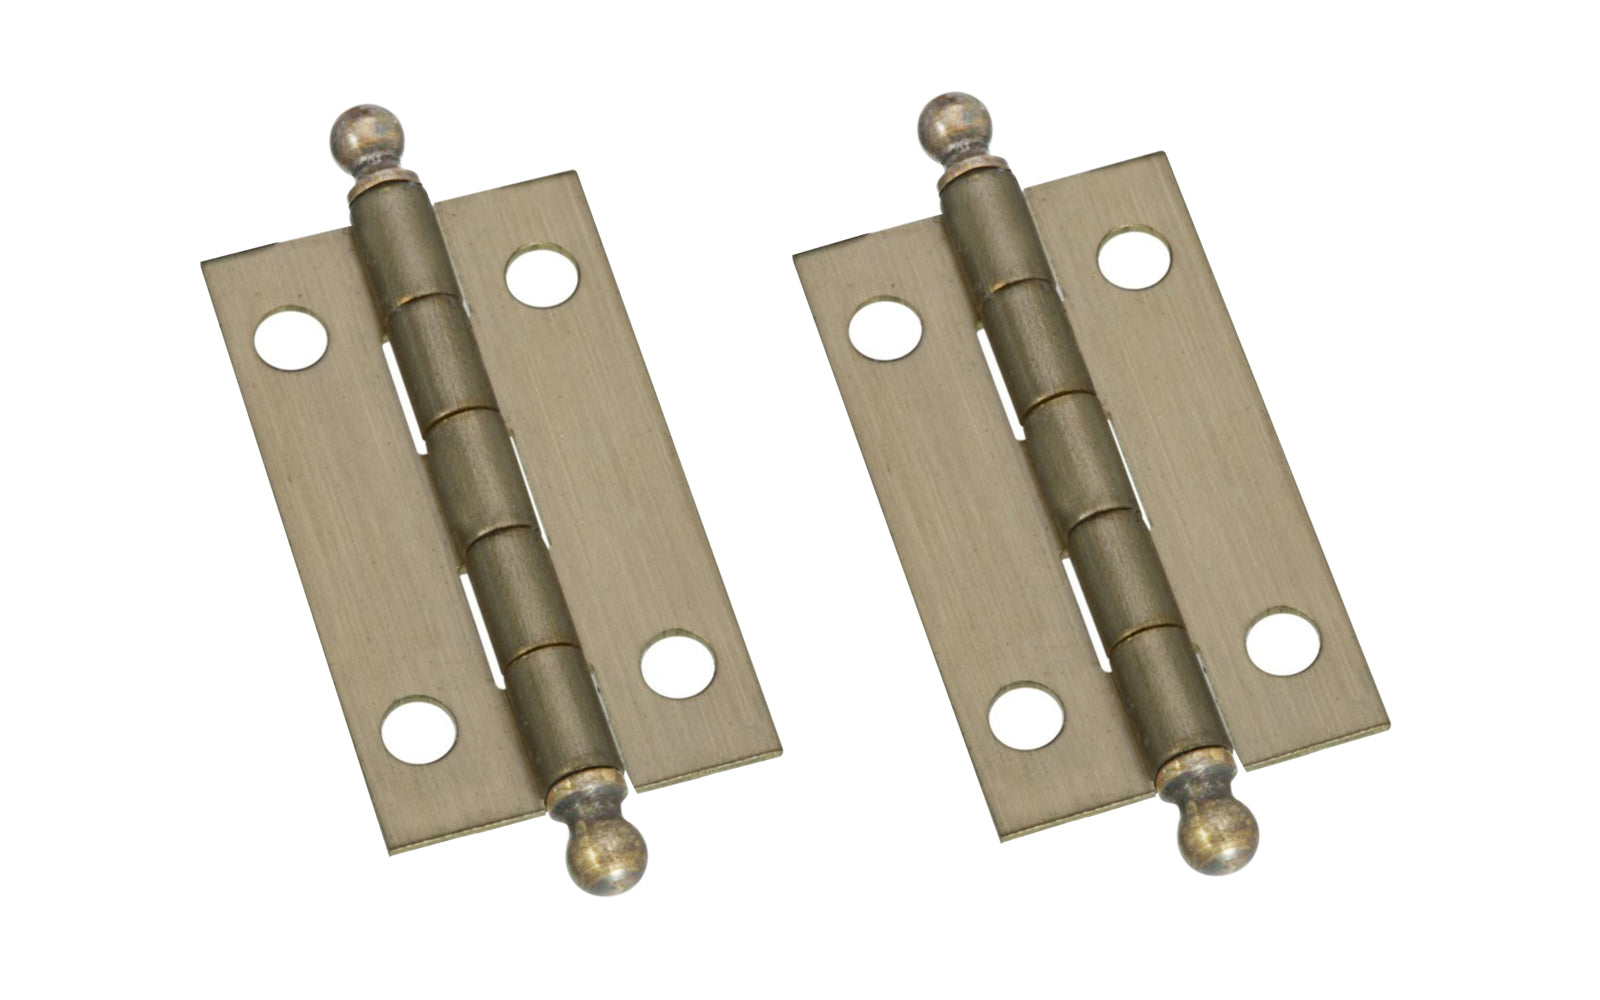 These ball tip antique brass hinges add a decorative appearance to small boxes, jewelry boxes, small lightweight cabinet doors, craft projects, etc. Solid brass material with antique brass finish. 1-1/2